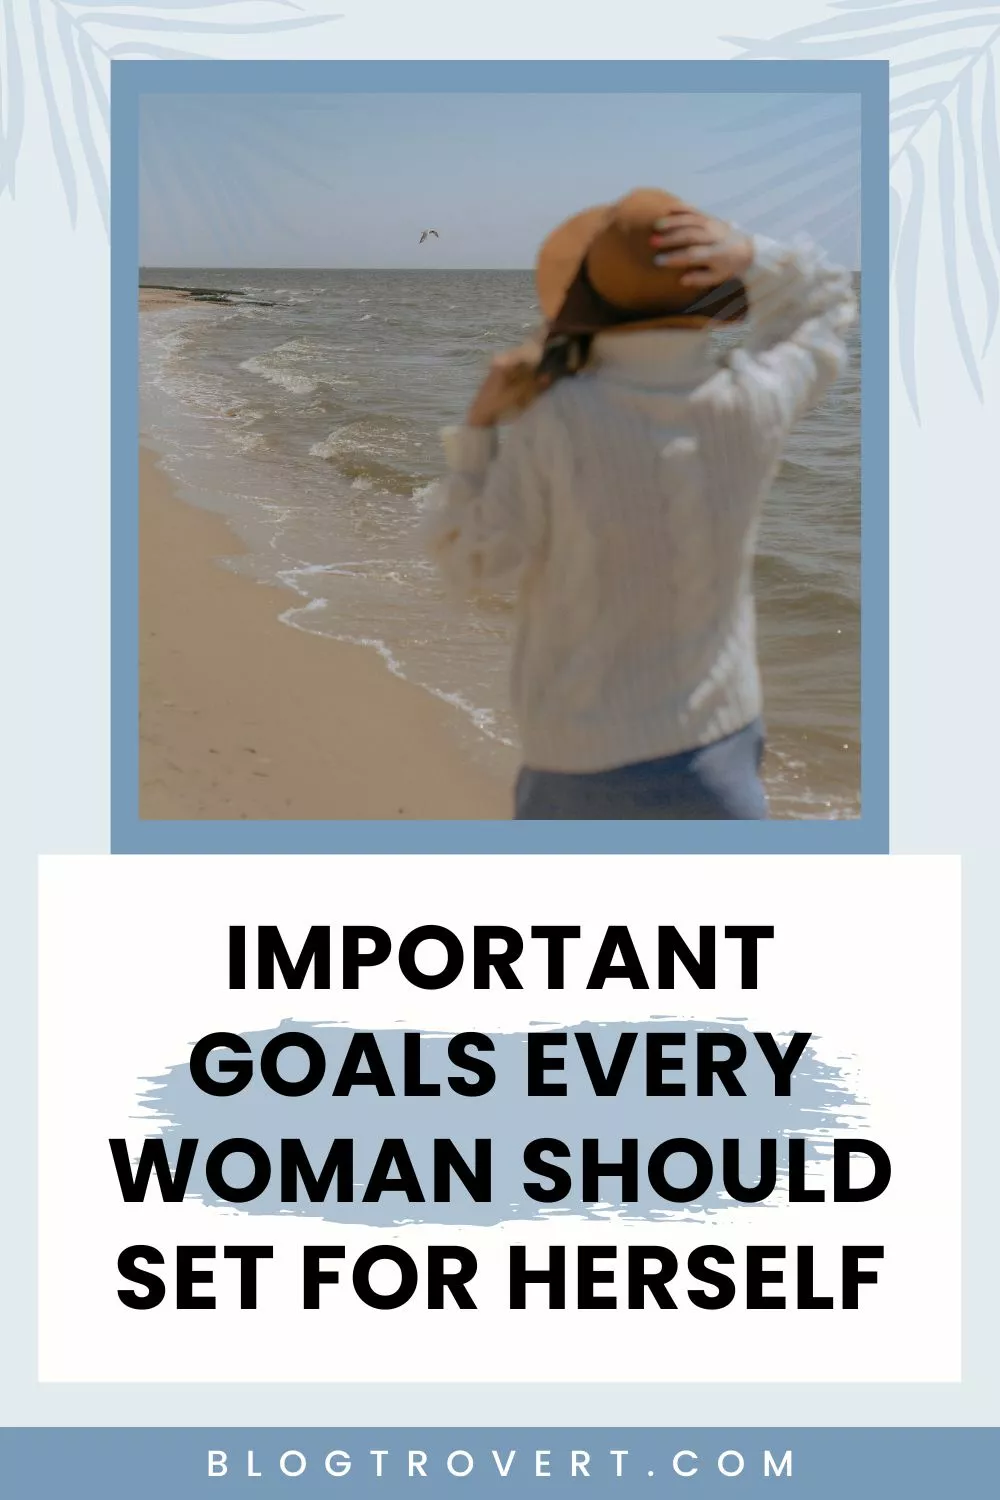 Personal Goals Every Woman Should Set